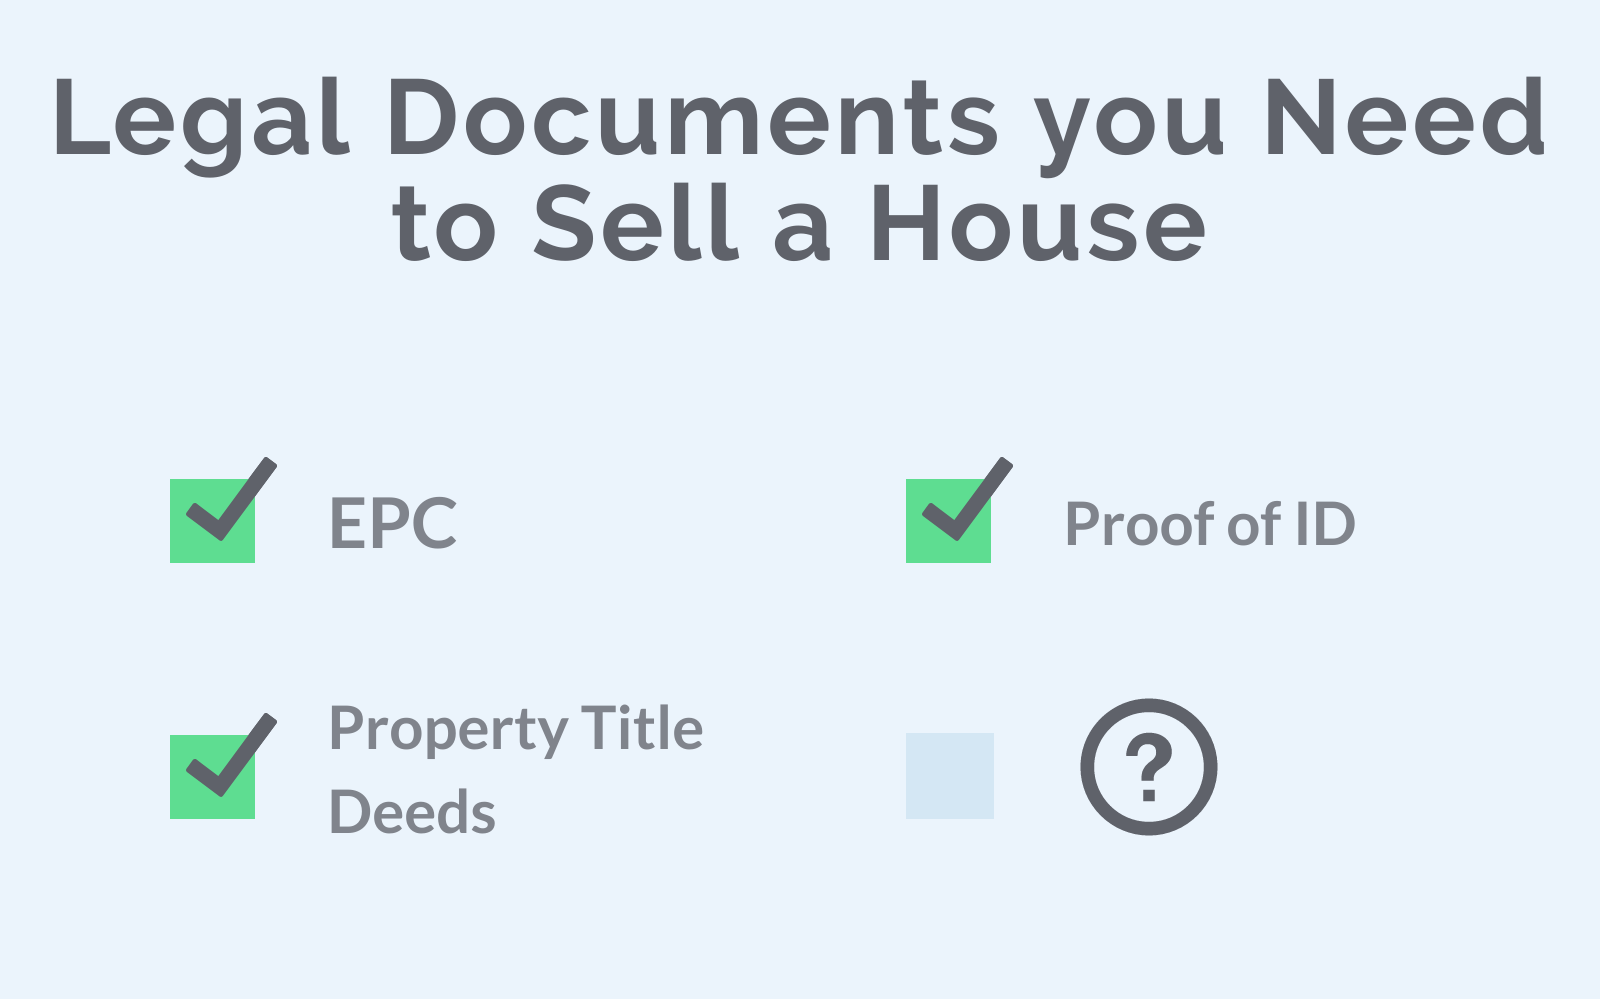 Legal Documents you Need to Sell a House